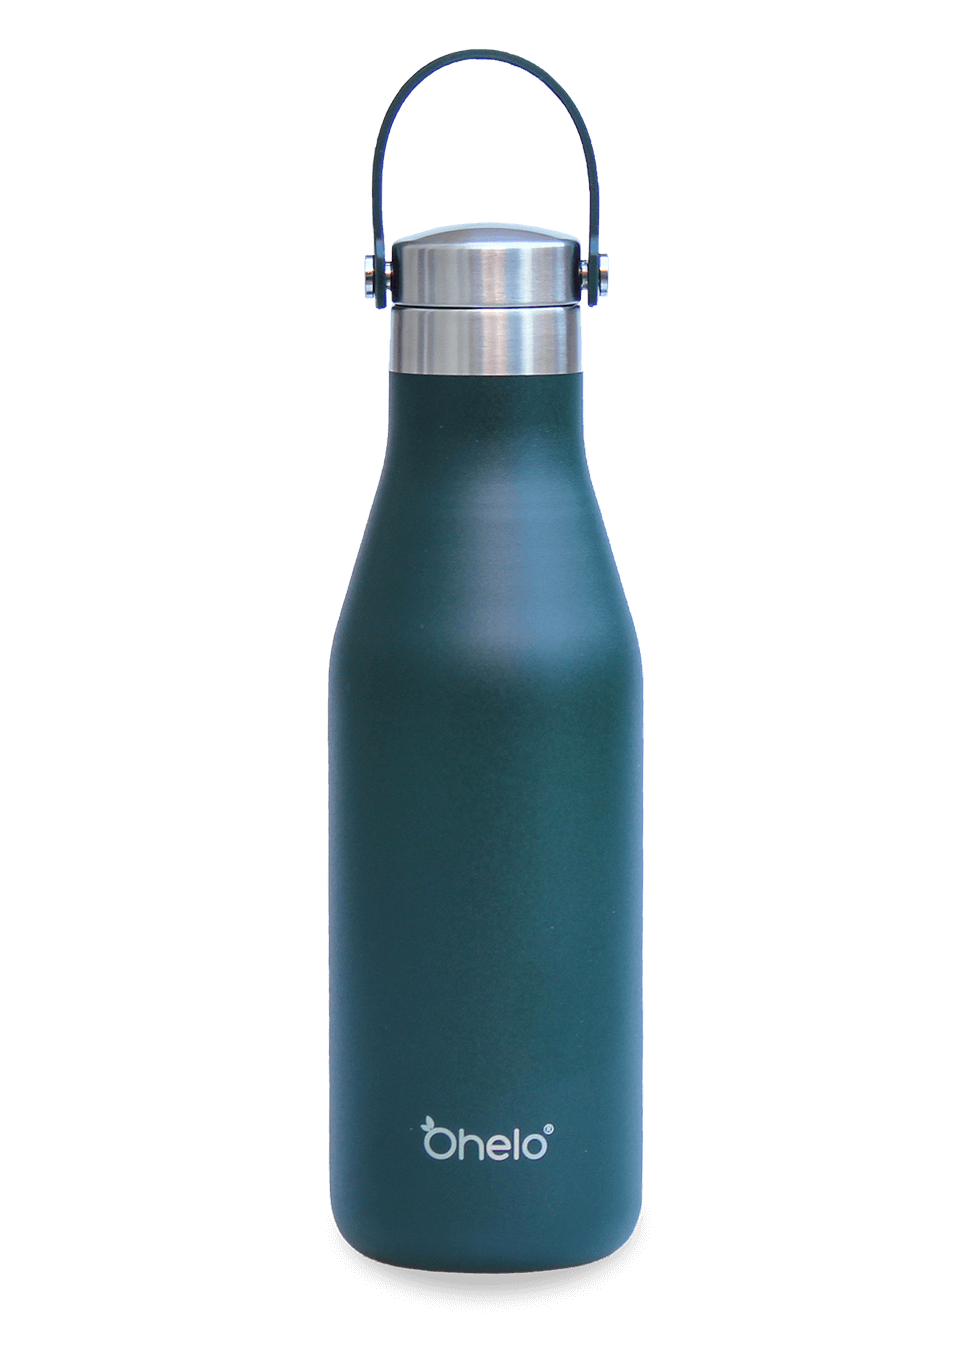 Ohelo stainless steel vacuum insulated water bottle in British Racing Green